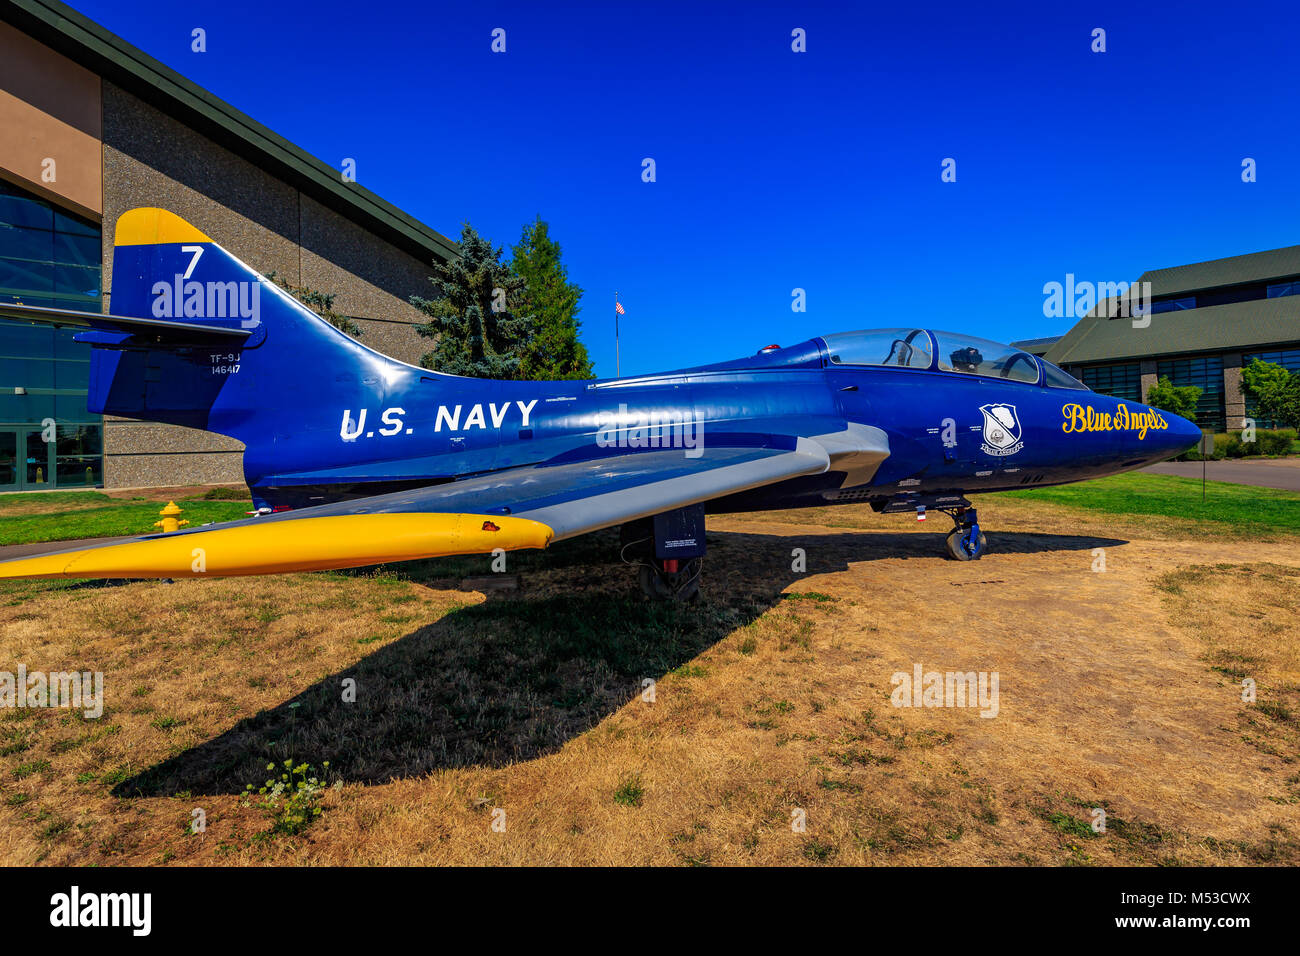 McMinnville, Oregon - August 21, 2017: Grumman TF-9J Cougar fighter aircraft in the color of the 'Blue Angels' on exhibition at Evergreen Aviation & S Stock Photo